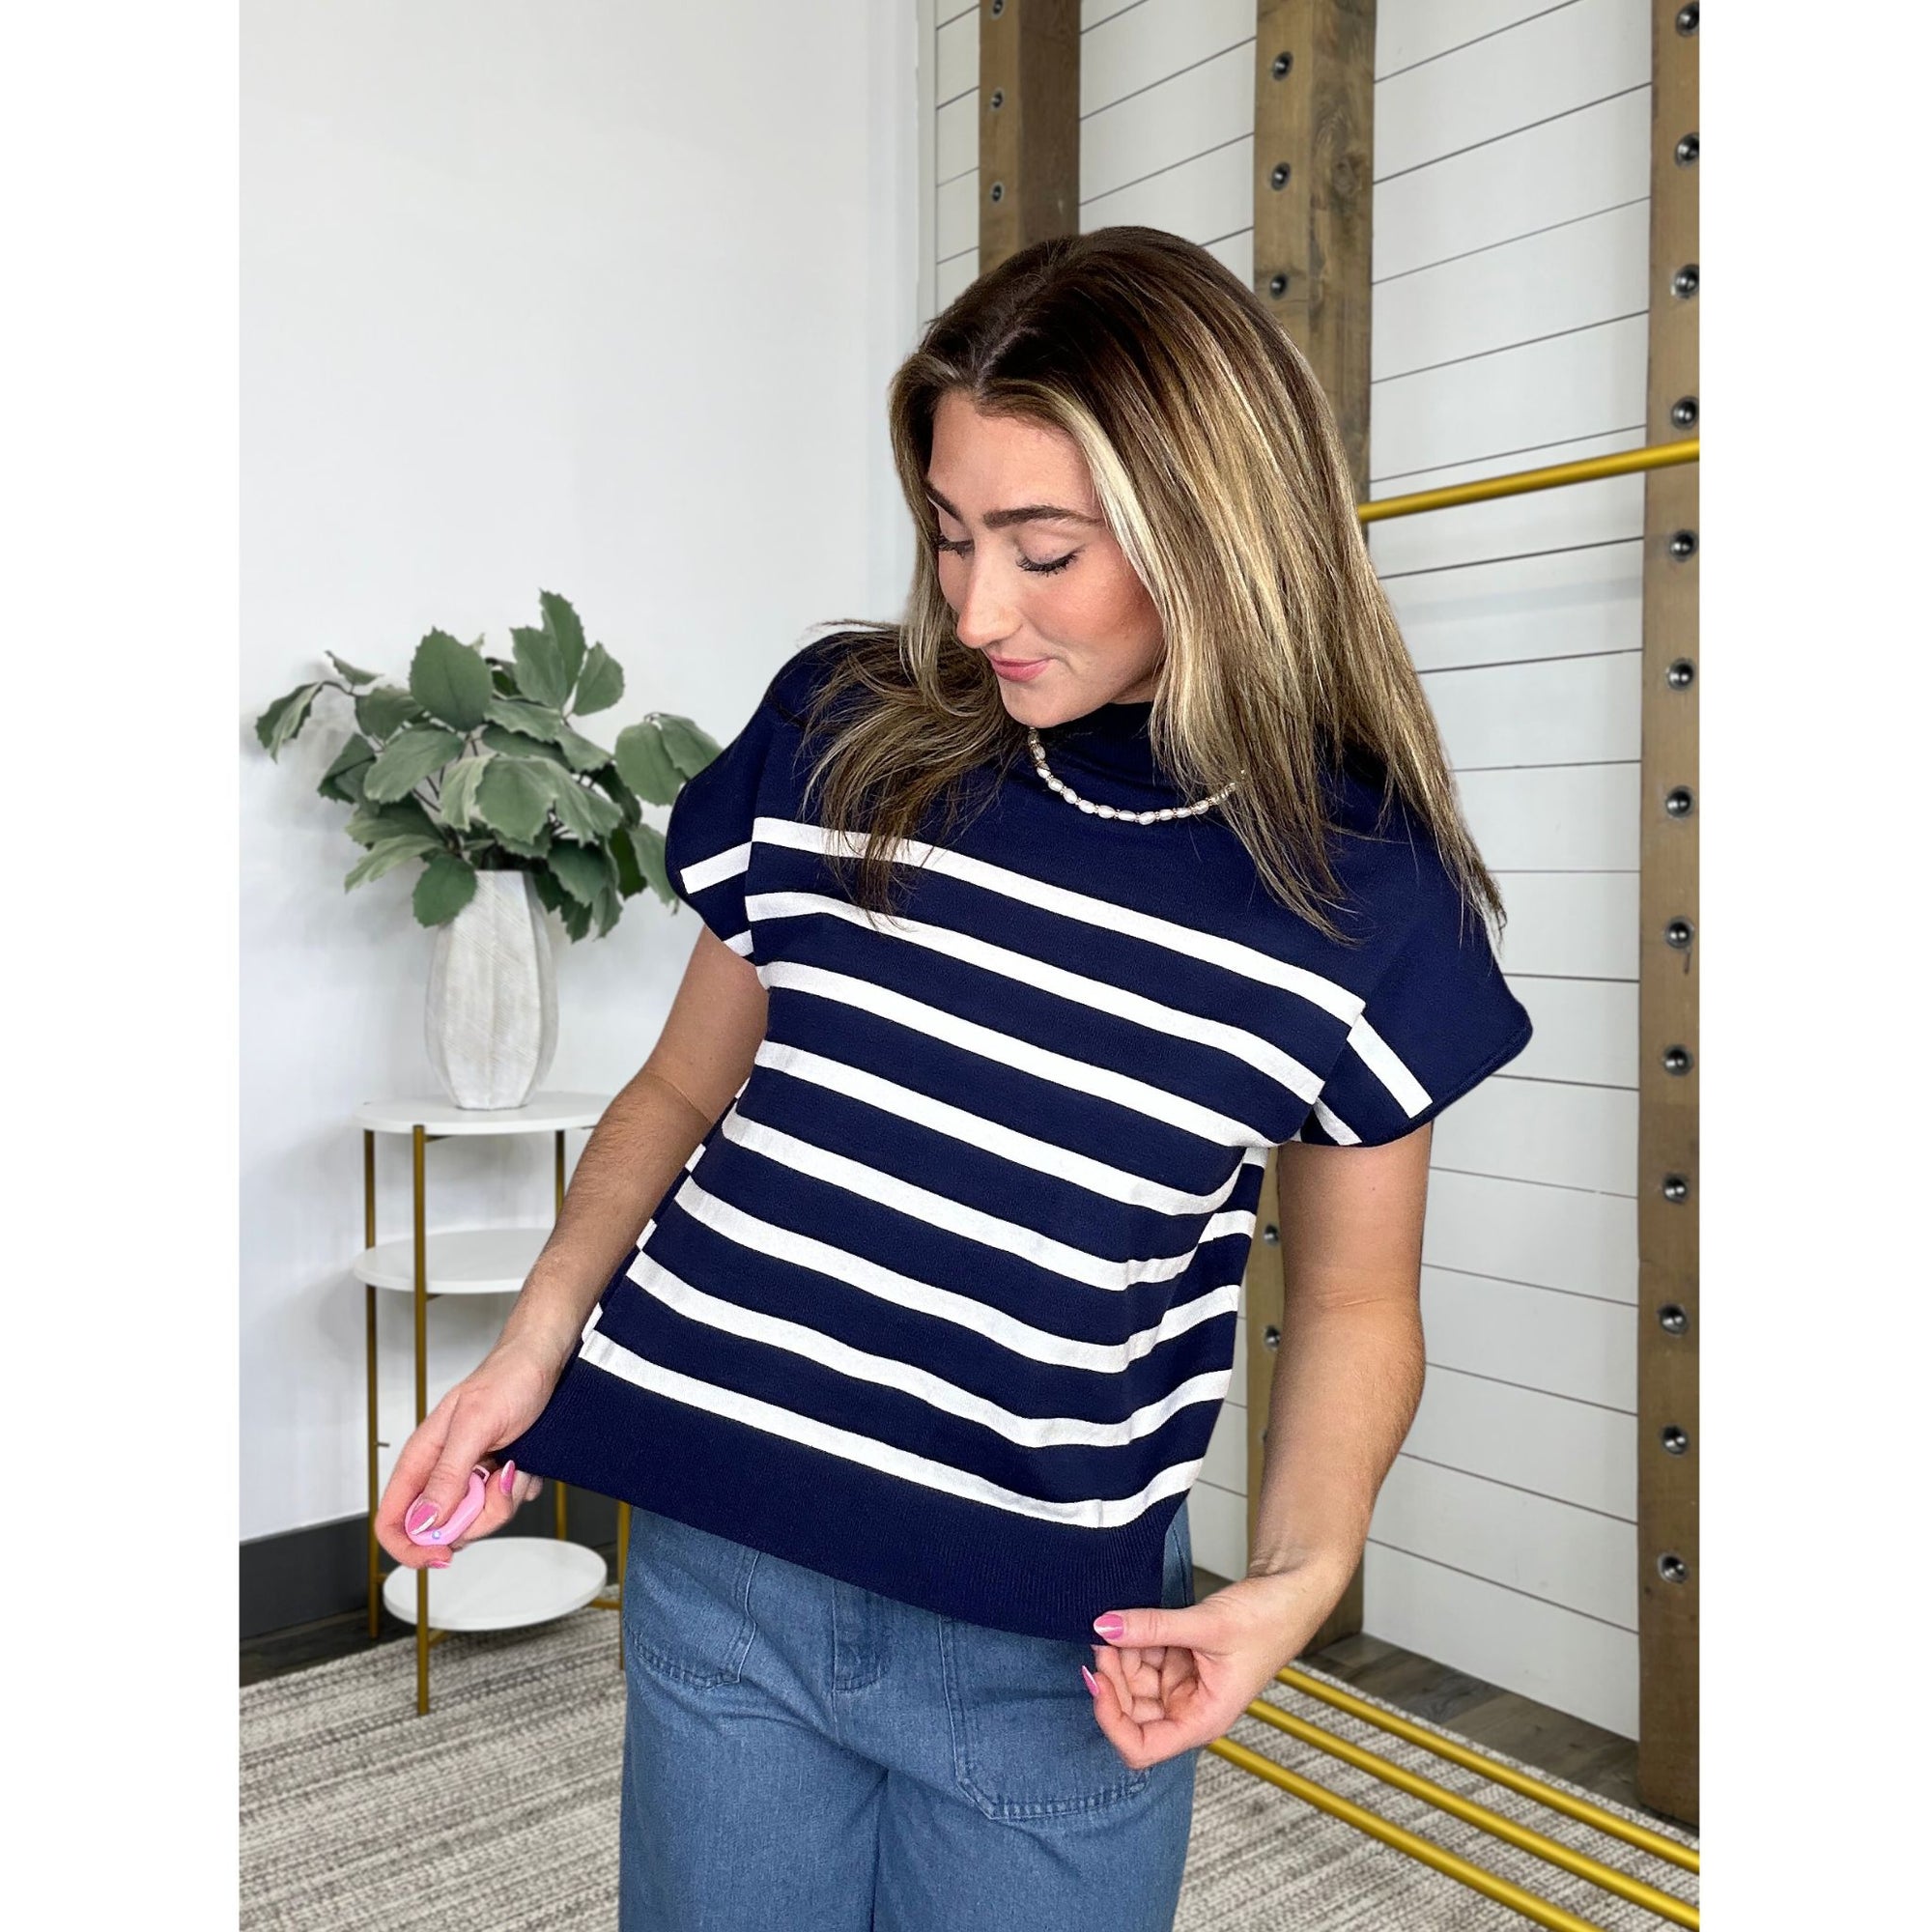 Follow Your Path Striped Top